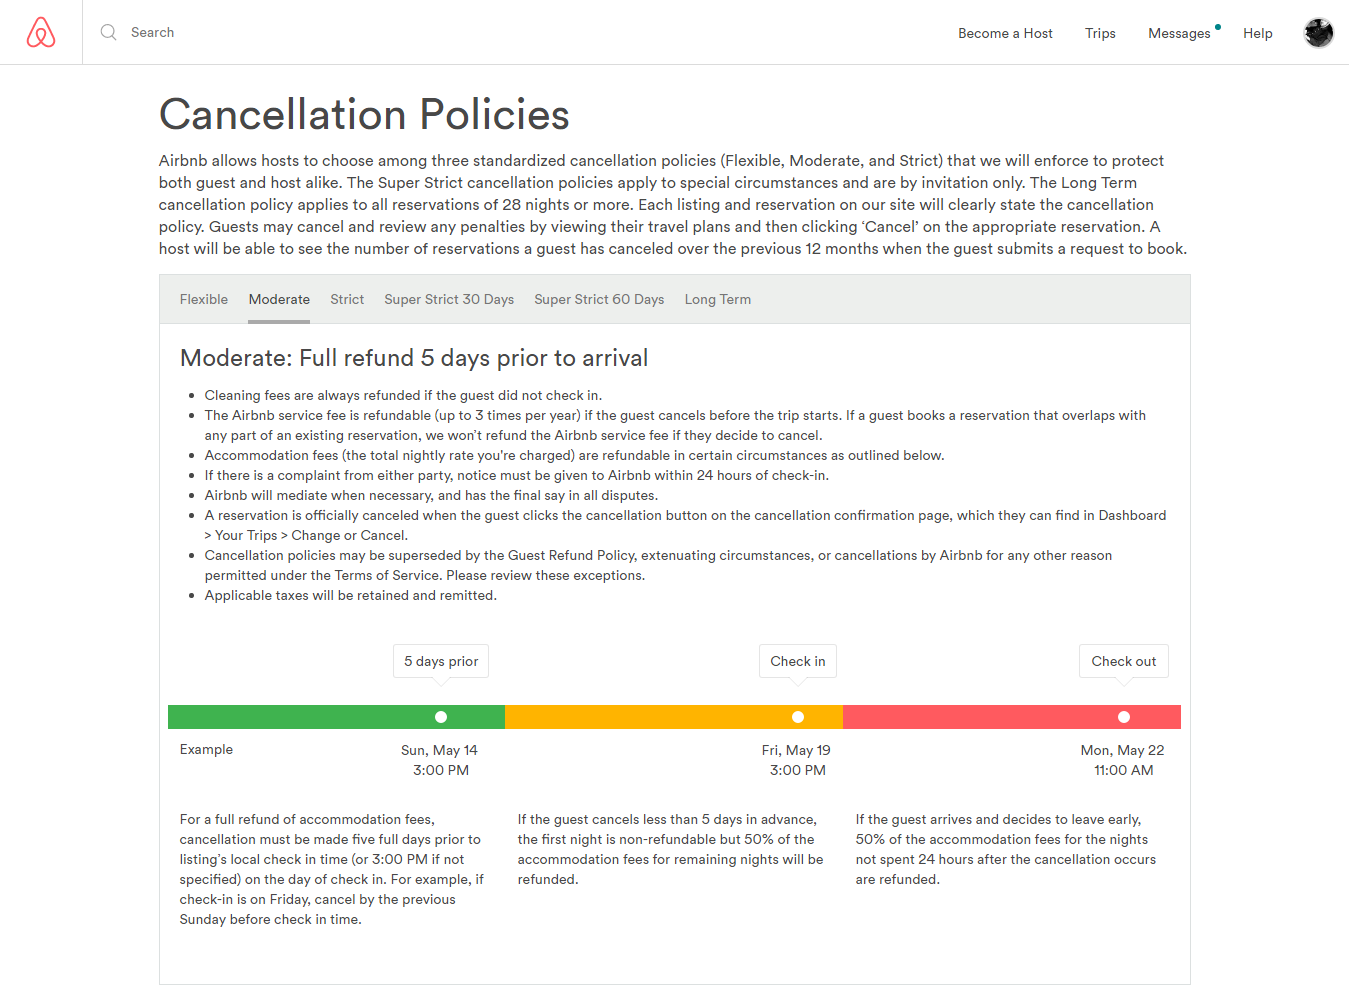 Cancellation Policies of Airbnb